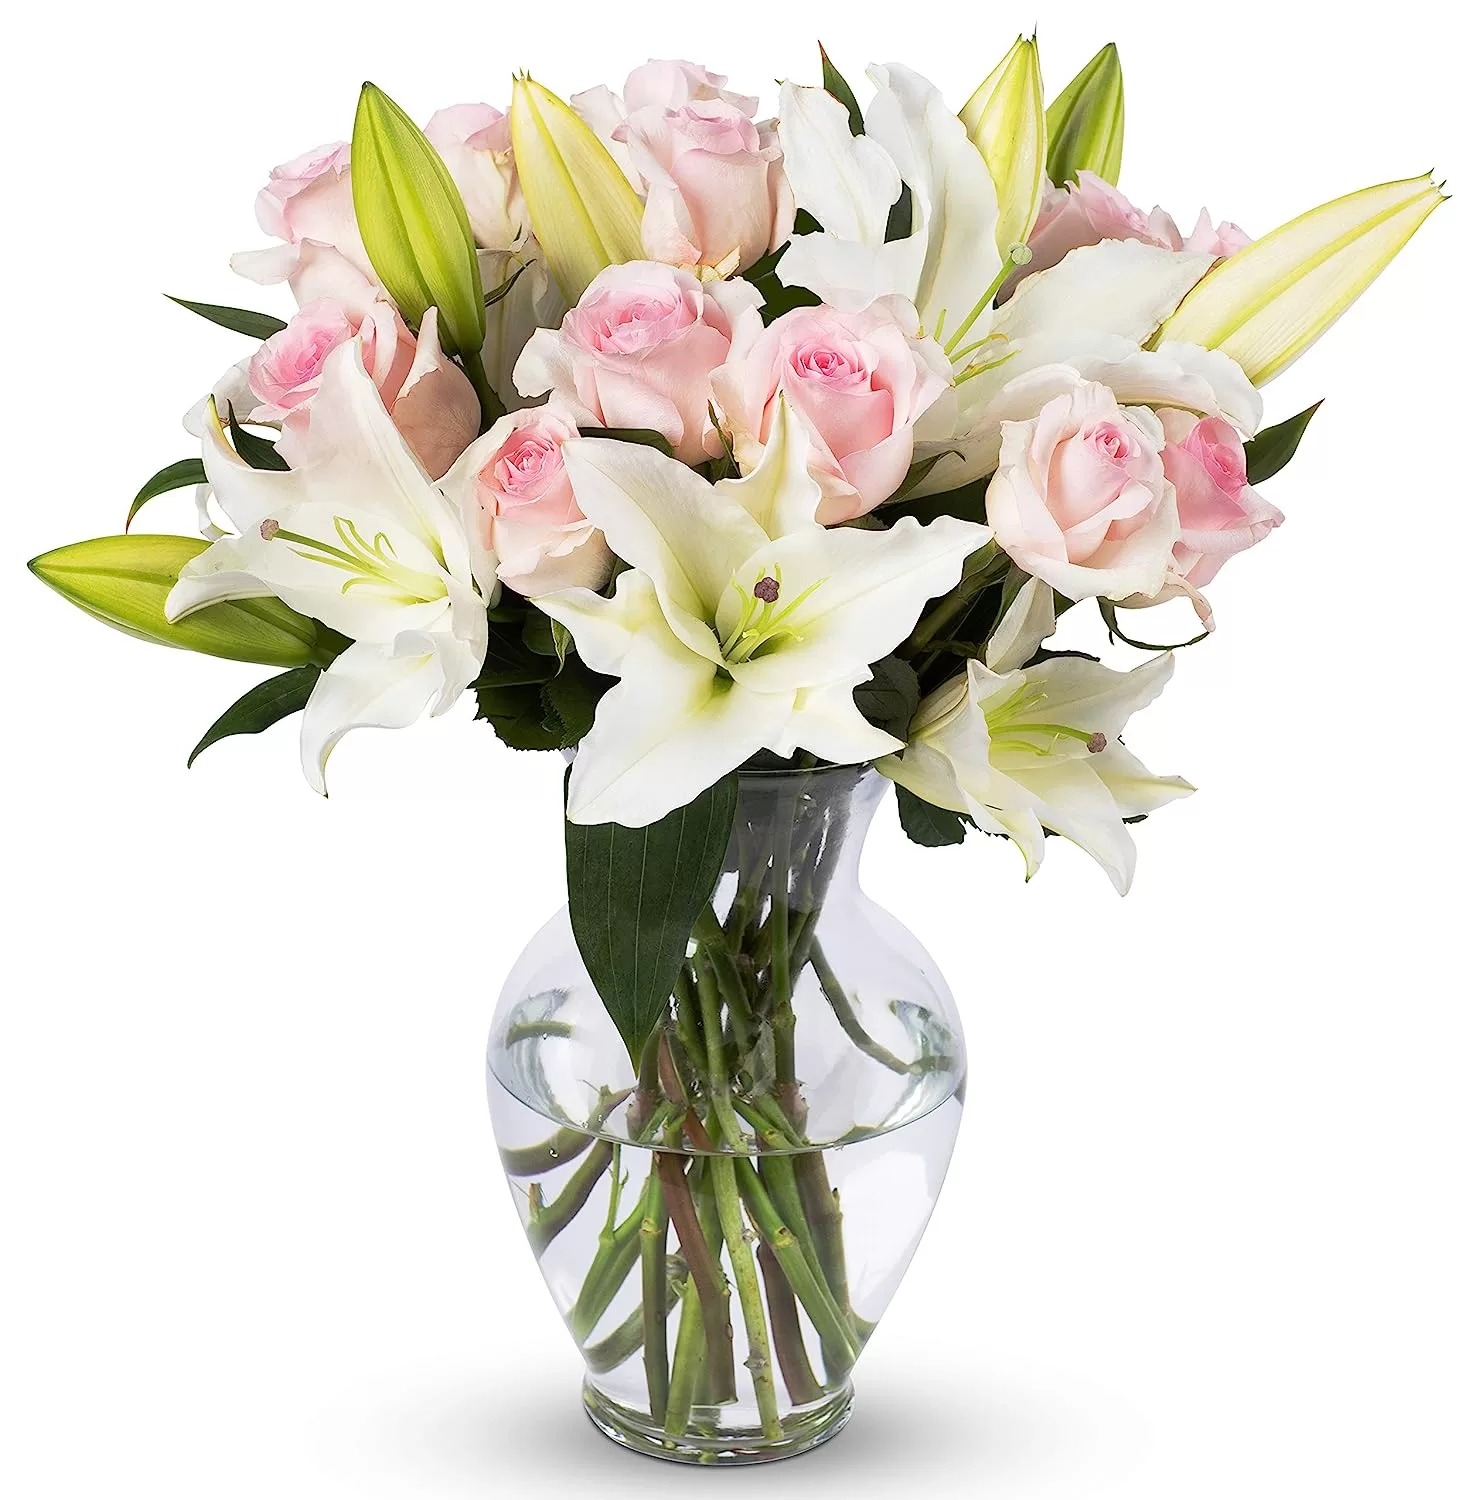 Amazon Prime Flowers arrangement with pink and white flowers